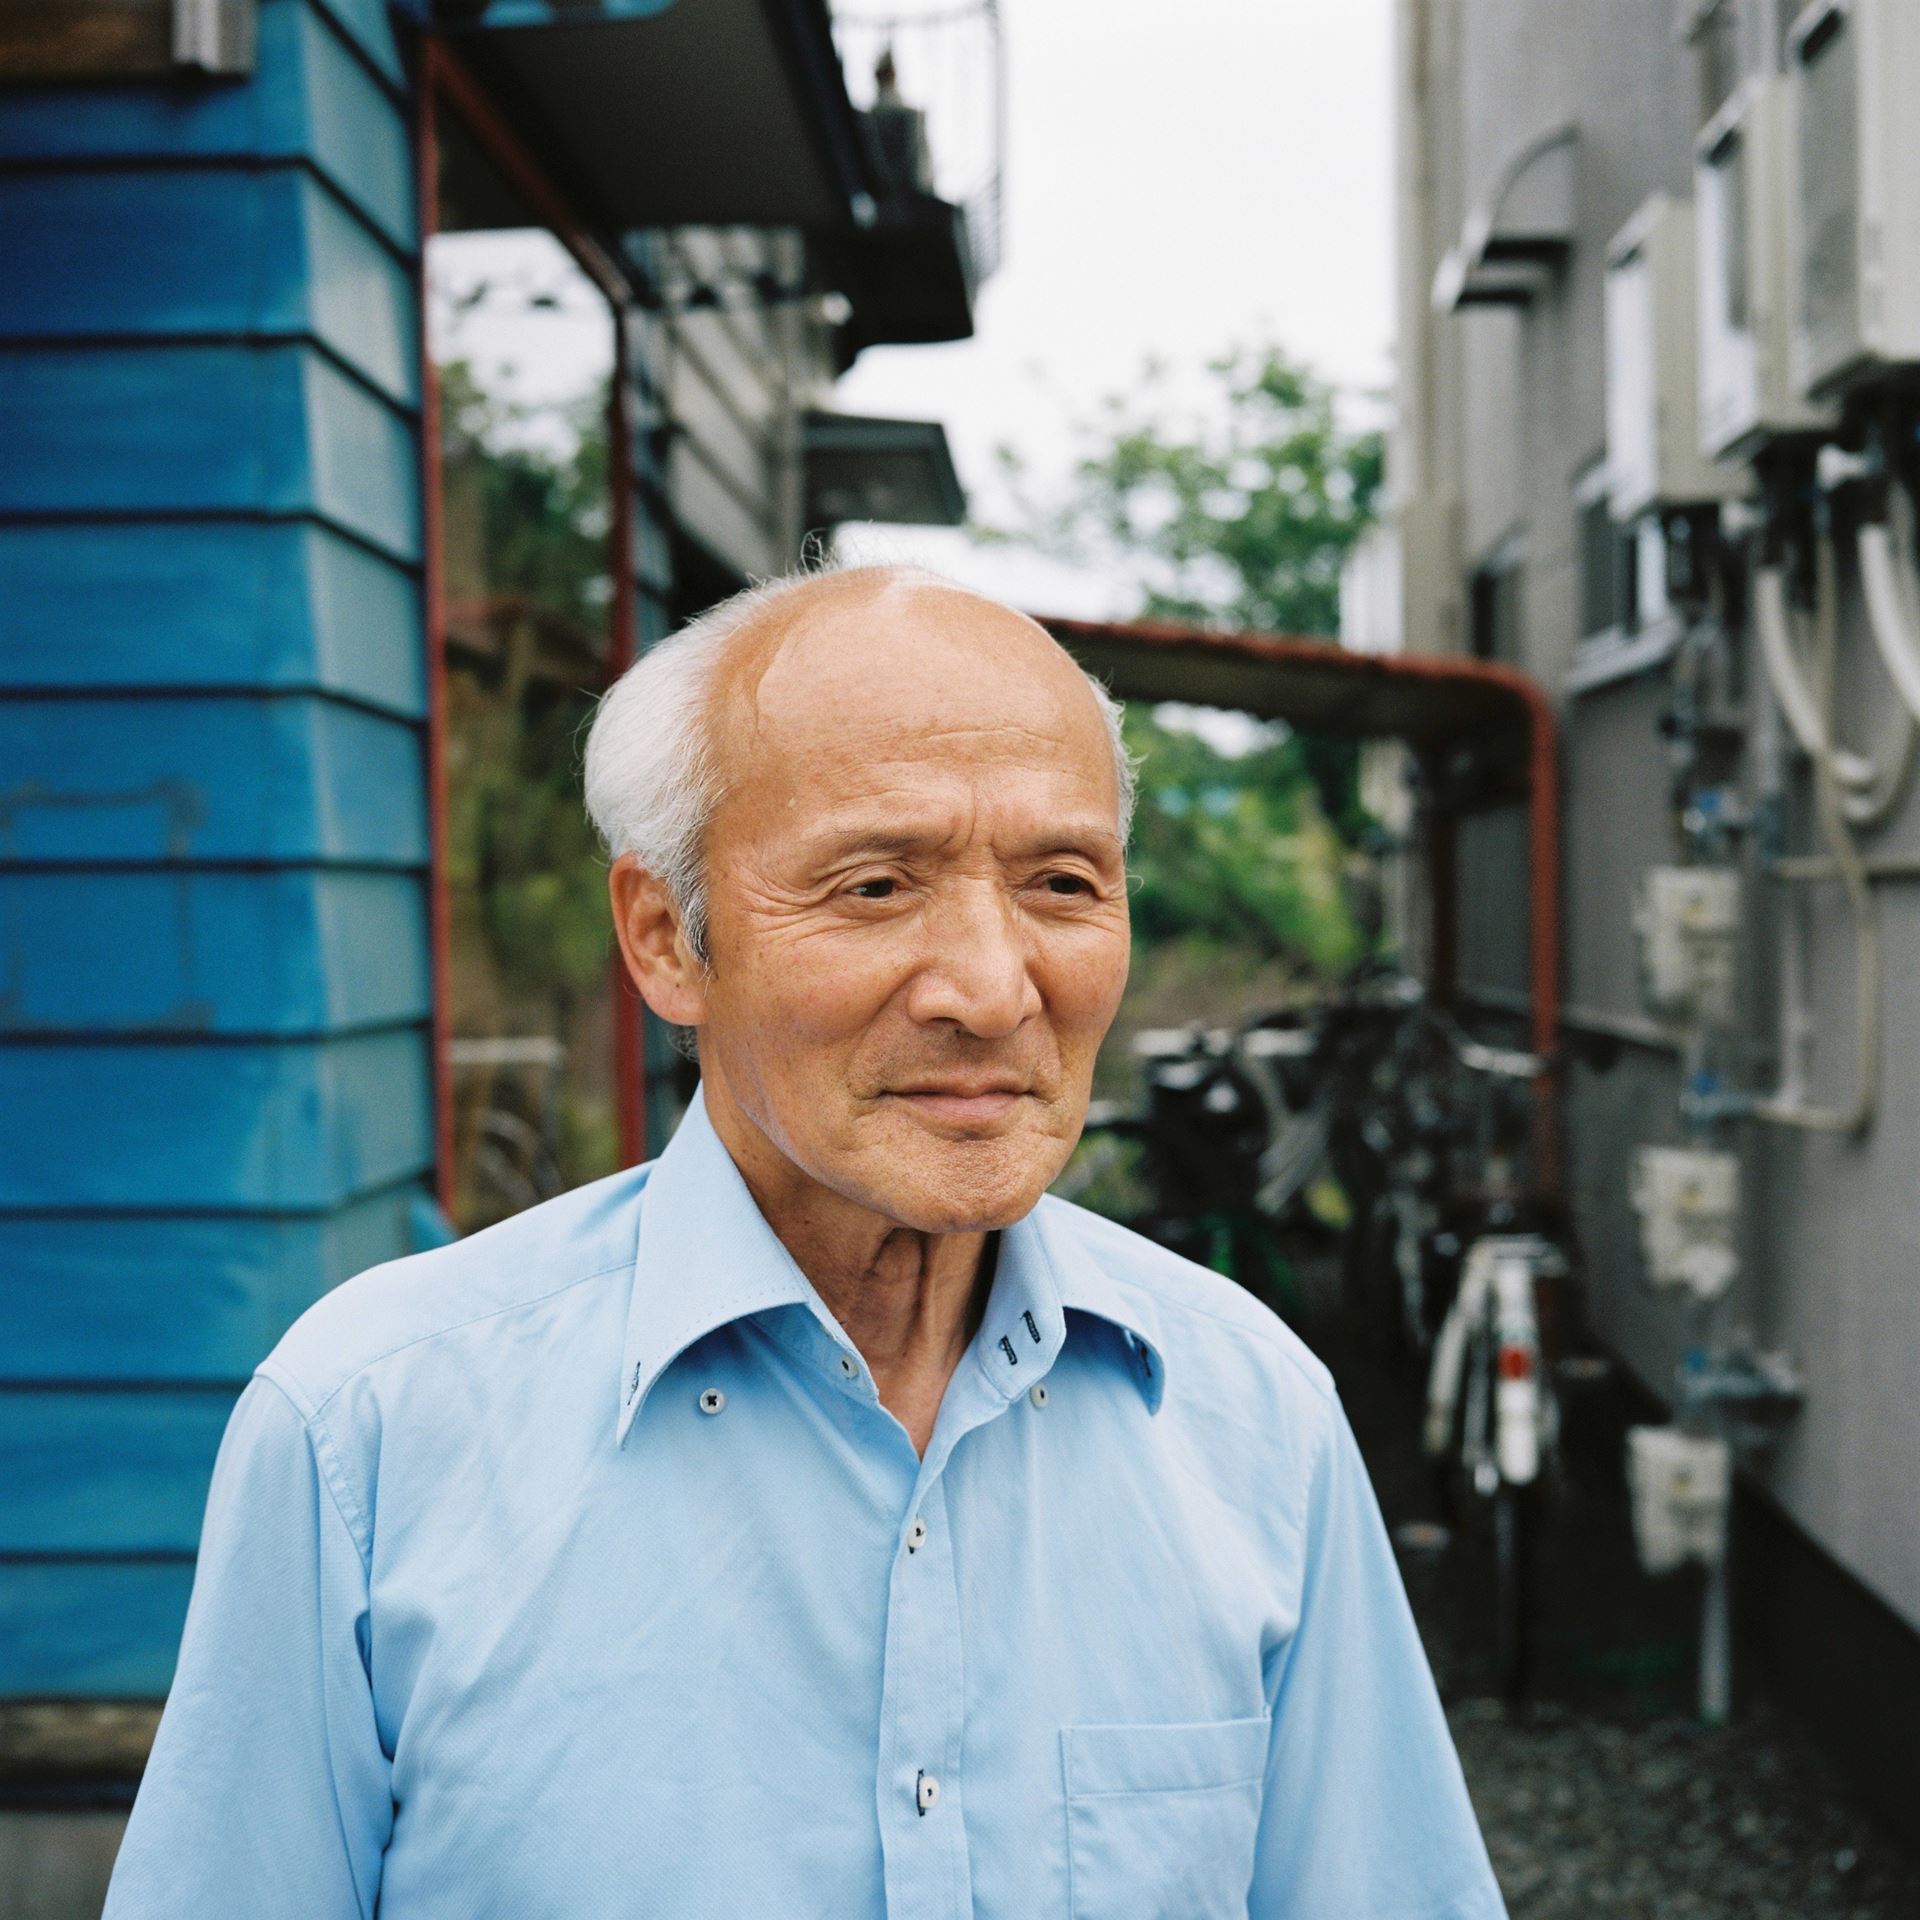 a man wearing a blue shirt standing in front of a building